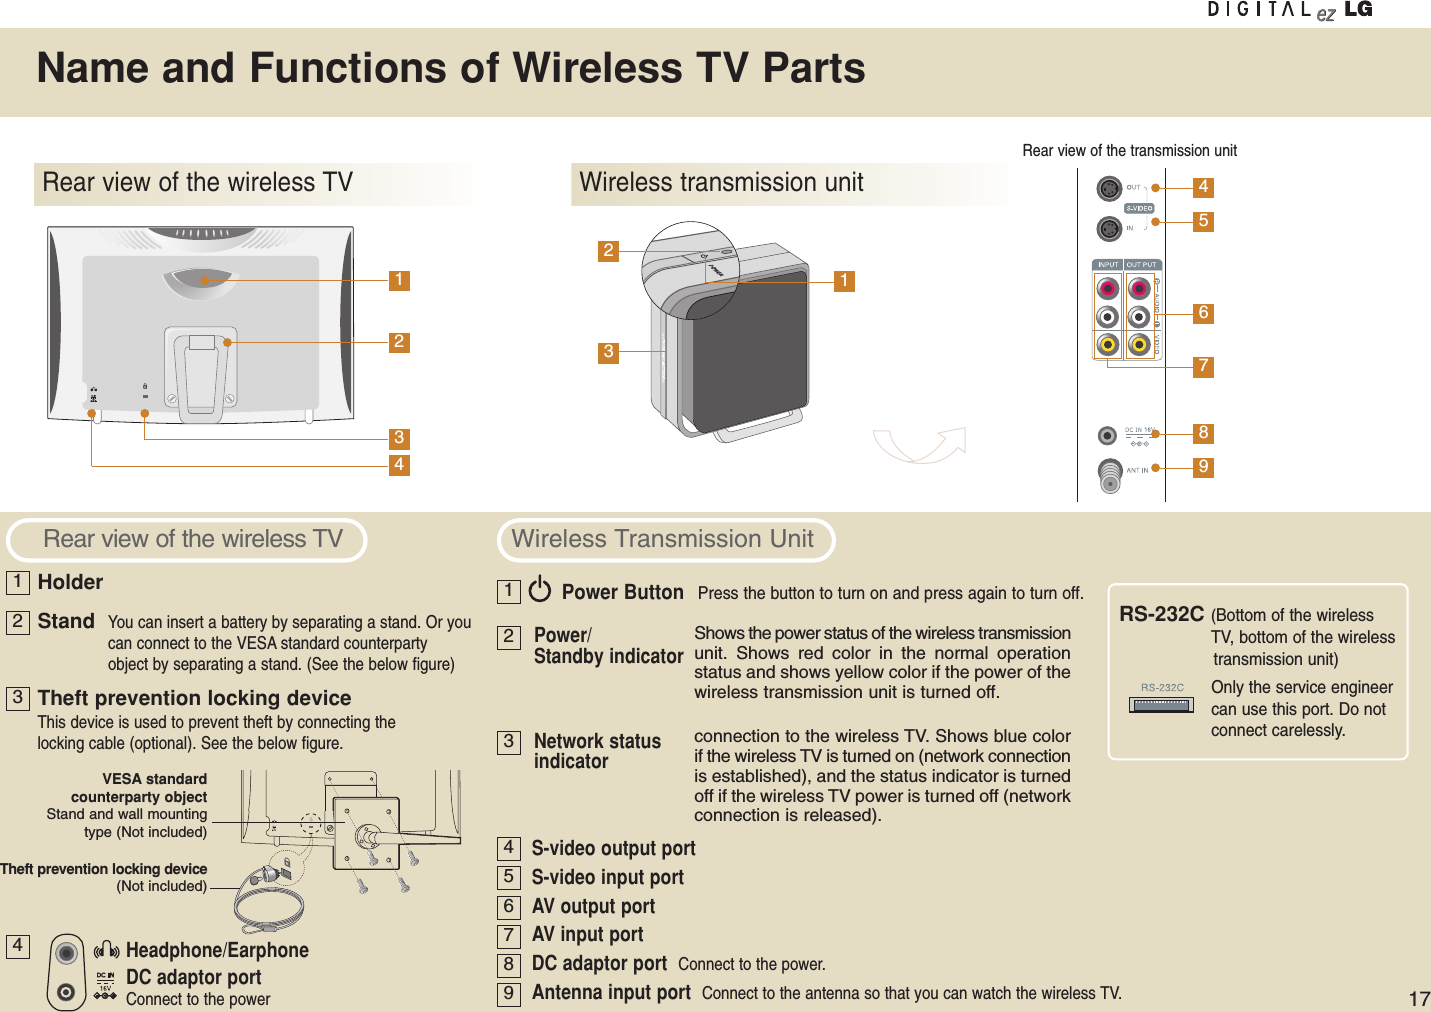 Name and Functions of Wireless TV Parts17Rear view of the wireless TV Wireless transmission unit14234123458967Rear view of the transmission unitHolderStand  You can insert a battery by separating a stand. Or youcan connect to the VESA standard counterpartyobject by separating a stand. (See the below figure)Theft prevention locking deviceThis device is used to prevent theft by connecting thelocking cable (optional). See the below figure.Headphone/Earphone DC adaptor portConnect to the powerVESA standard counterparty objectStand and wall mountingtype (Not included)Theft prevention locking device(Not included)Rear view of the wireless TV Wireless Transmission Unit123456789Power Button Press the button to turn on and press again to turn off.Power/Standby indicatorNetwork statusindicatorOnly the service engineercan use this port. Do notconnect carelessly.Shows the power status of the wireless transmissionunit. Shows red color in the normal operationstatus and shows yellow color if the power of thewireless transmission unit is turned off.connection to the wireless TV. Shows blue colorif the wireless TV is turned on (network connectionis established), and the status indicator is turnedoff if the wireless TV power is turned off (networkconnection is released).S-video output portS-video input portAV output portAV input portDC adaptor portConnect to the power.Antenna input port  Connect to the antenna so that you can watch the wireless TV.231RS-232C (Bottom of the wirelessTV, bottom of the wireless transmission unit) 